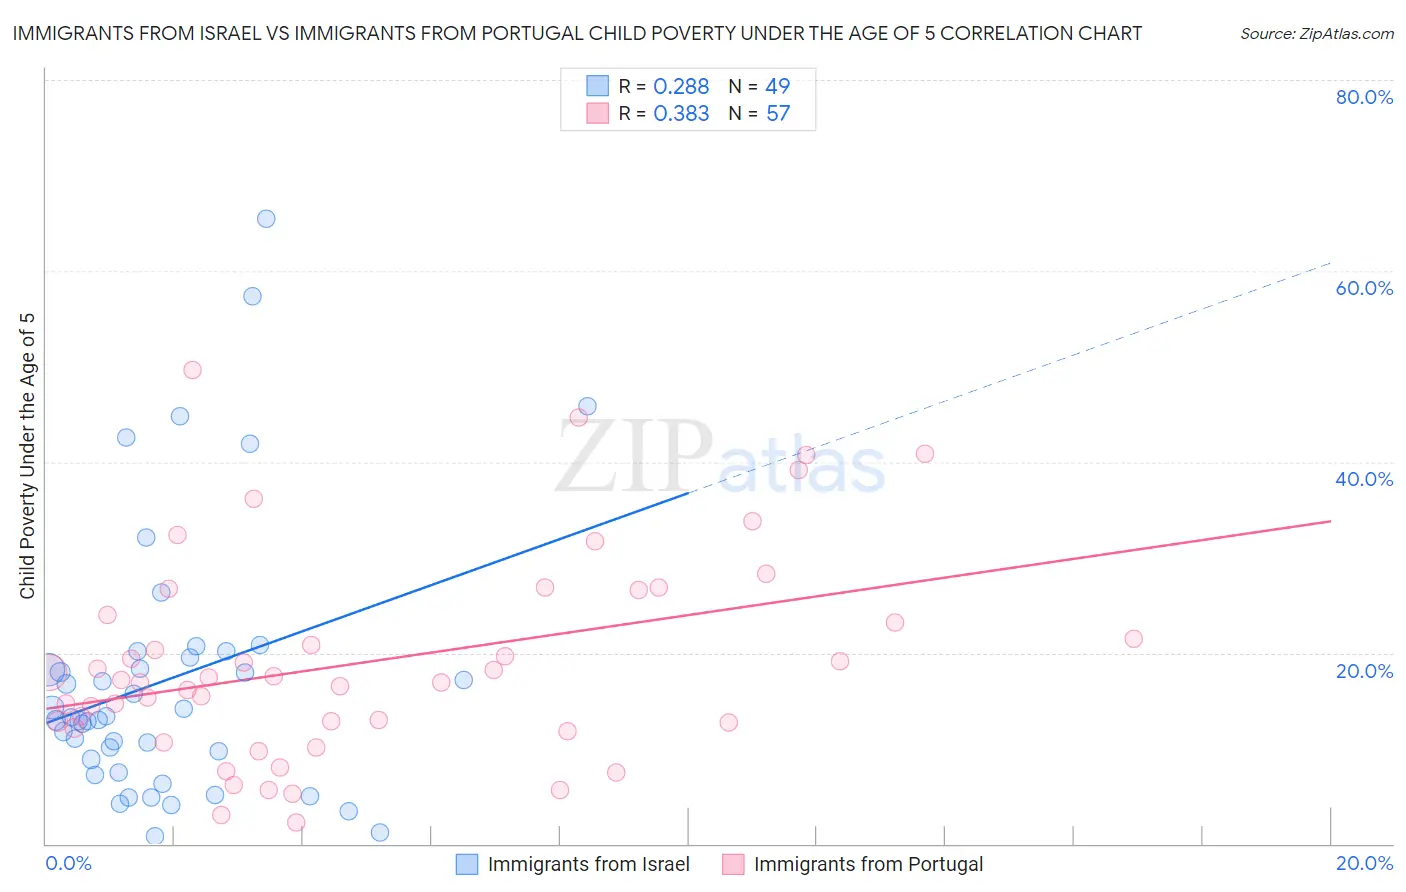 Immigrants from Israel vs Immigrants from Portugal Child Poverty Under the Age of 5